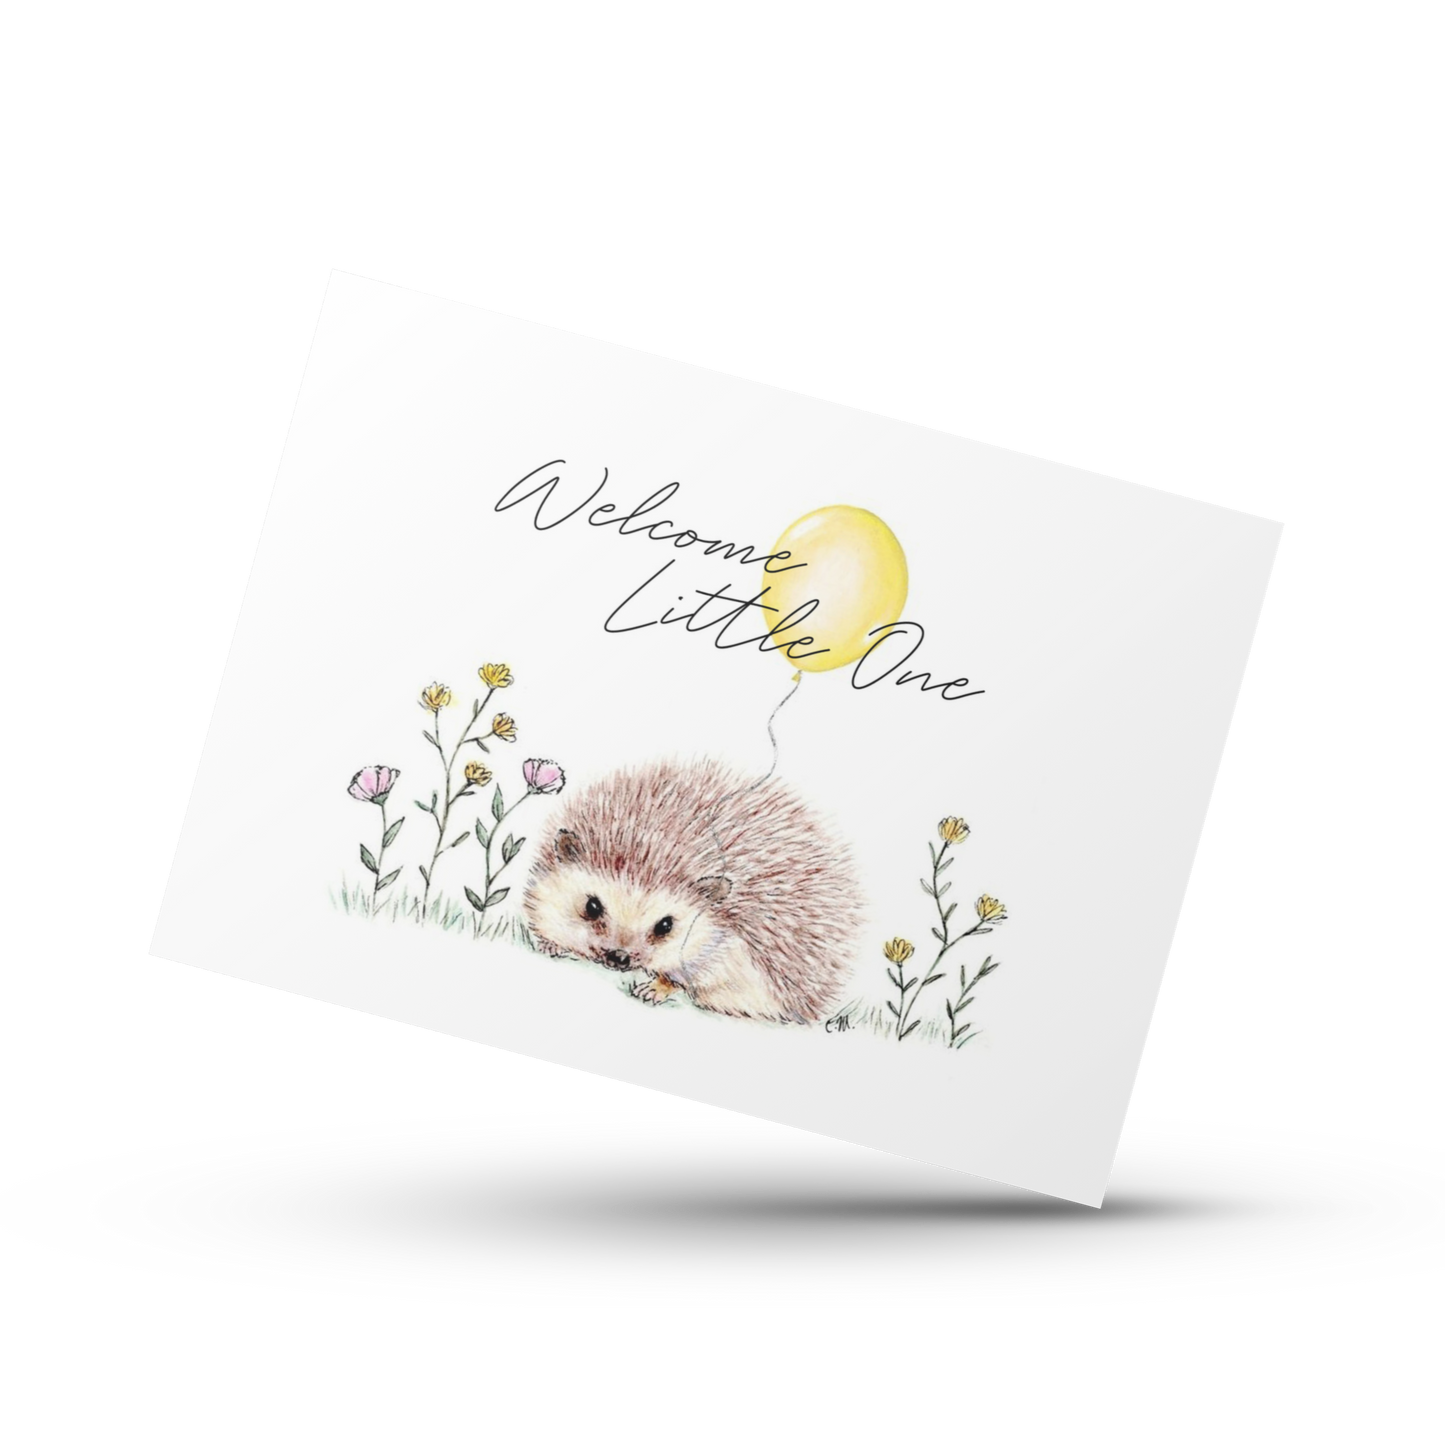 Welcome little one, New baby card, Baby shower card, Cute woodland animal card, Nursery card, Mom to be card, New mom dad card, Neutral baby